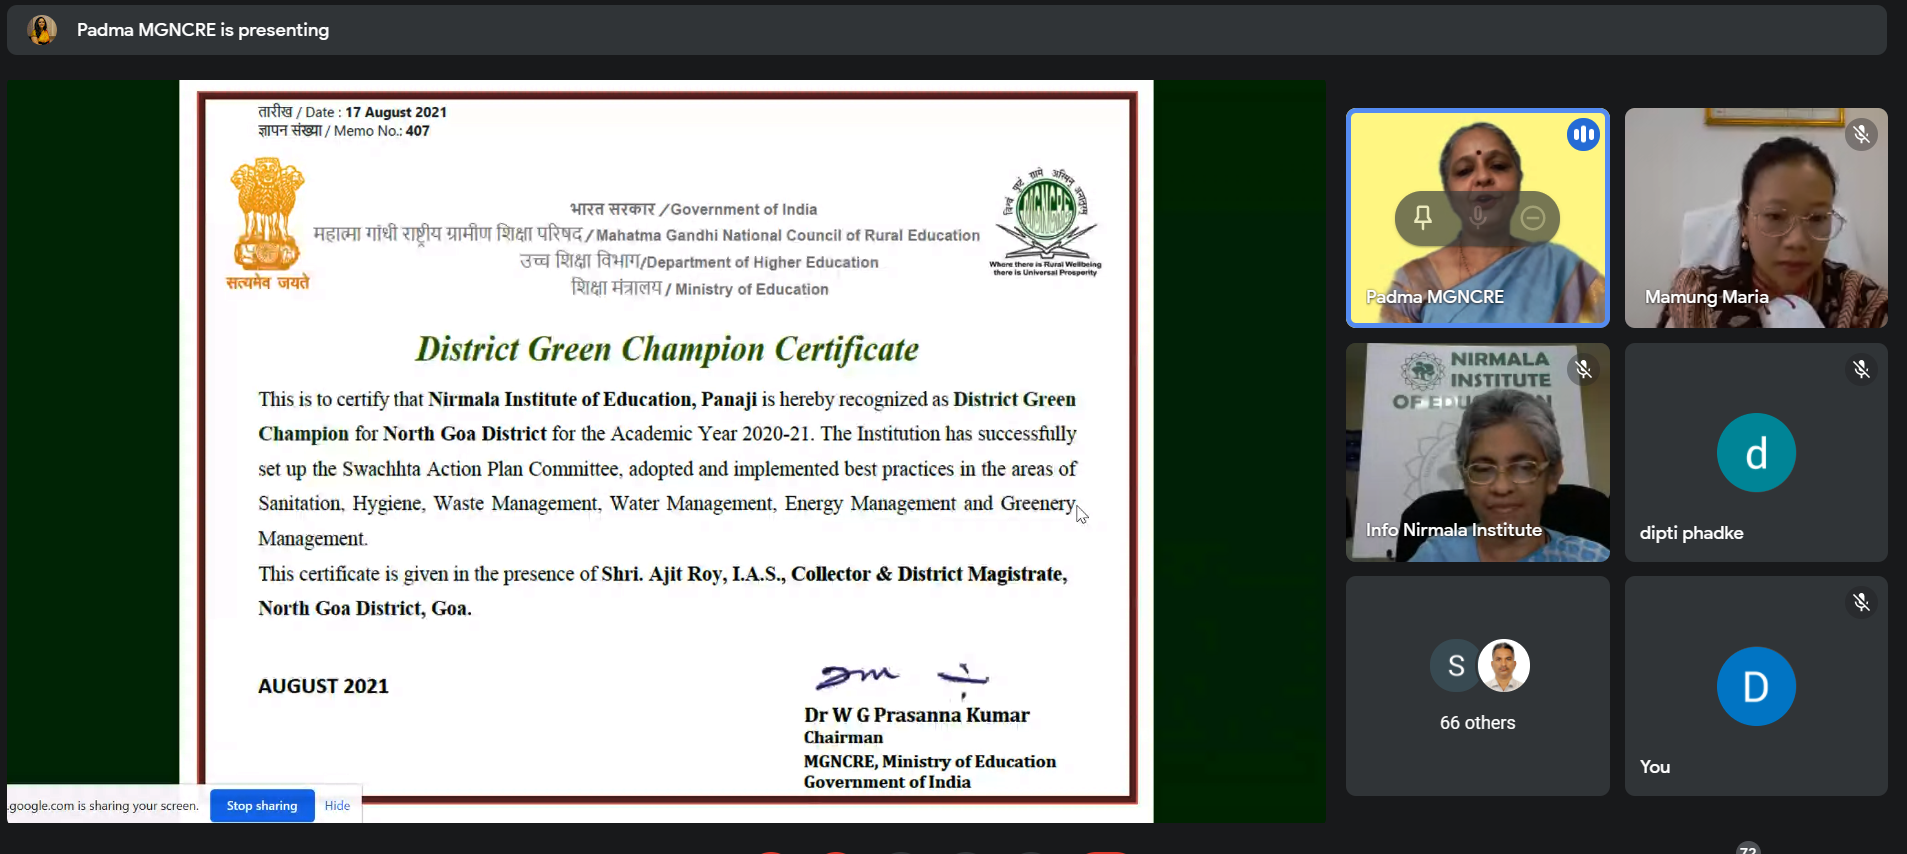 District Green Champion for North Goa District for the Academic Year 2020-21